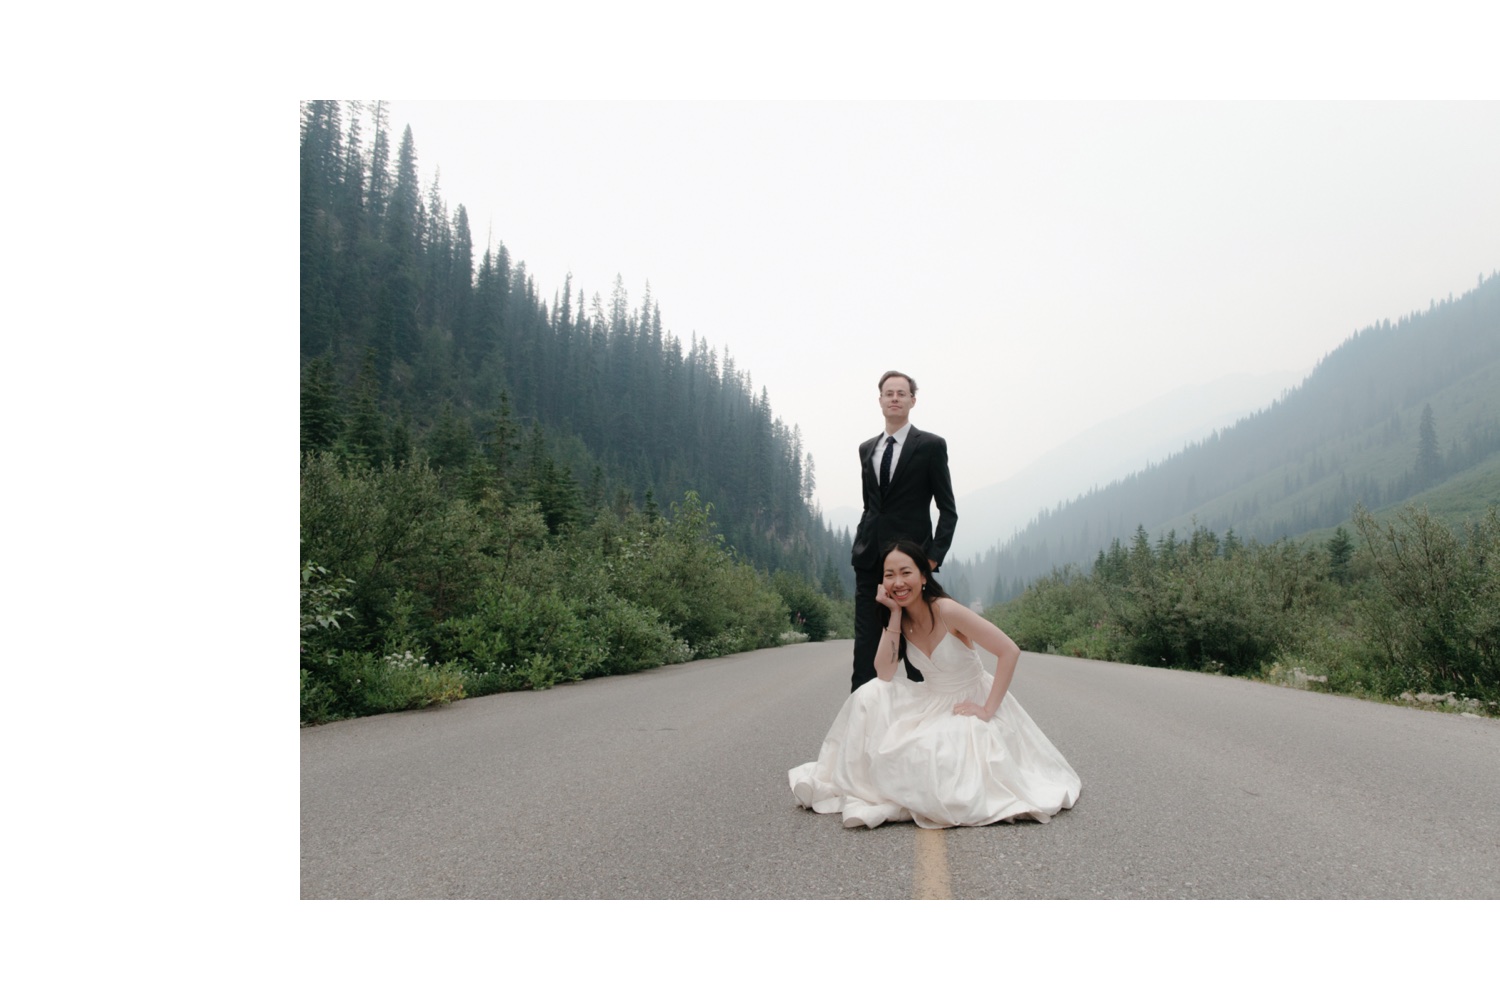 Couple recreating a 1990s album cover photo on their elopement